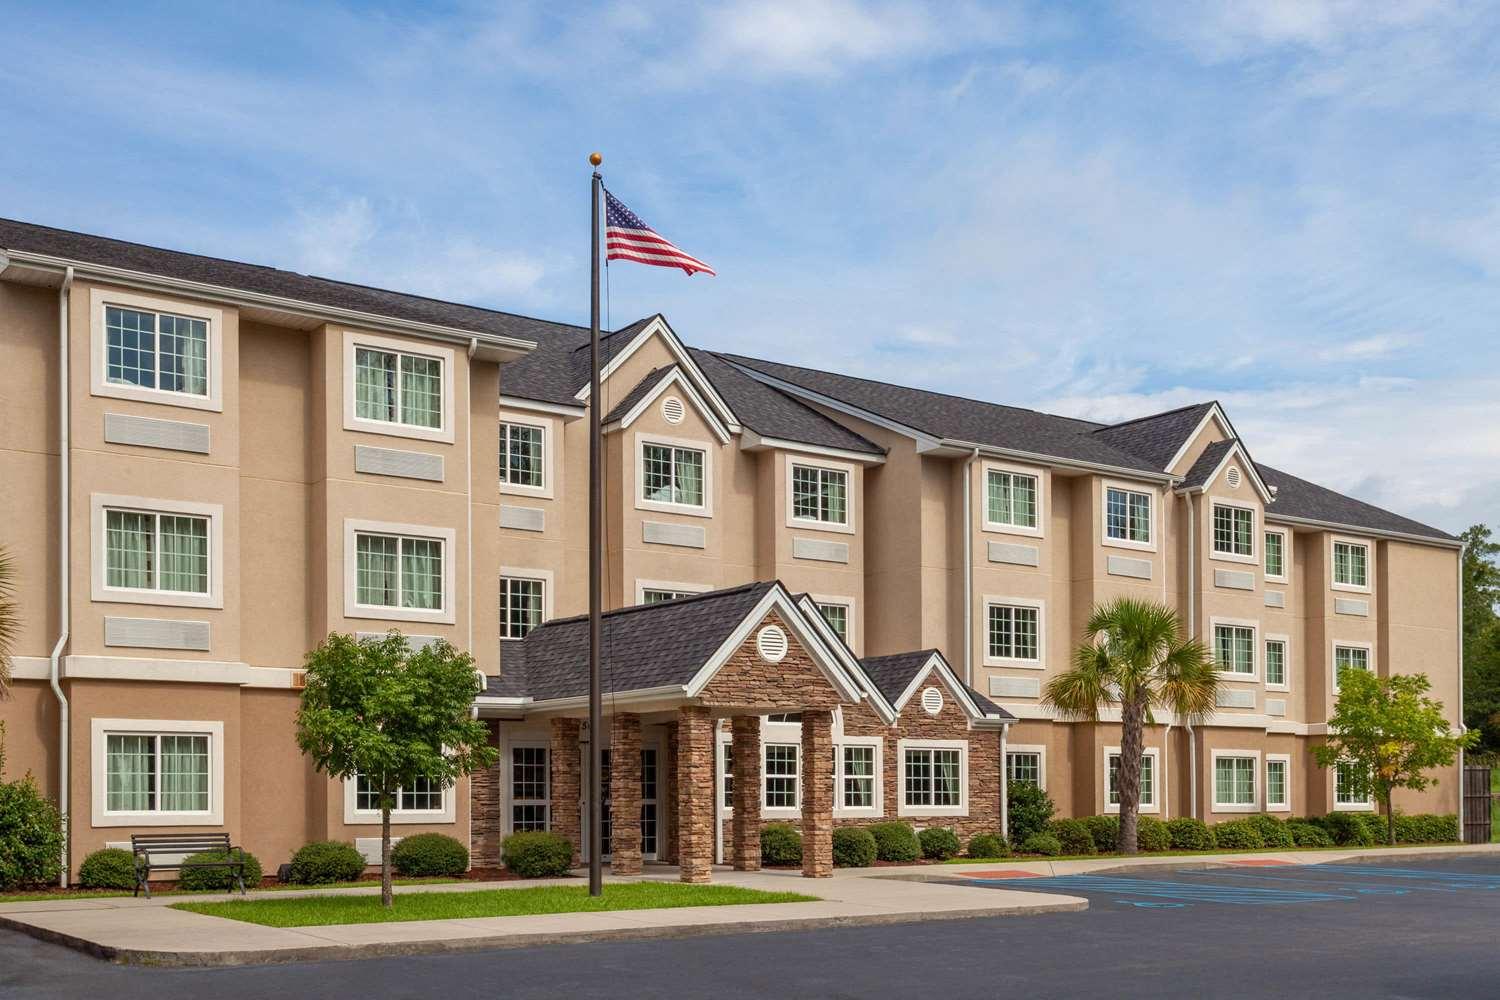 Microtel Inn & Suites by Wyndham Columbia/At Fort Jackson in Columbia, SC